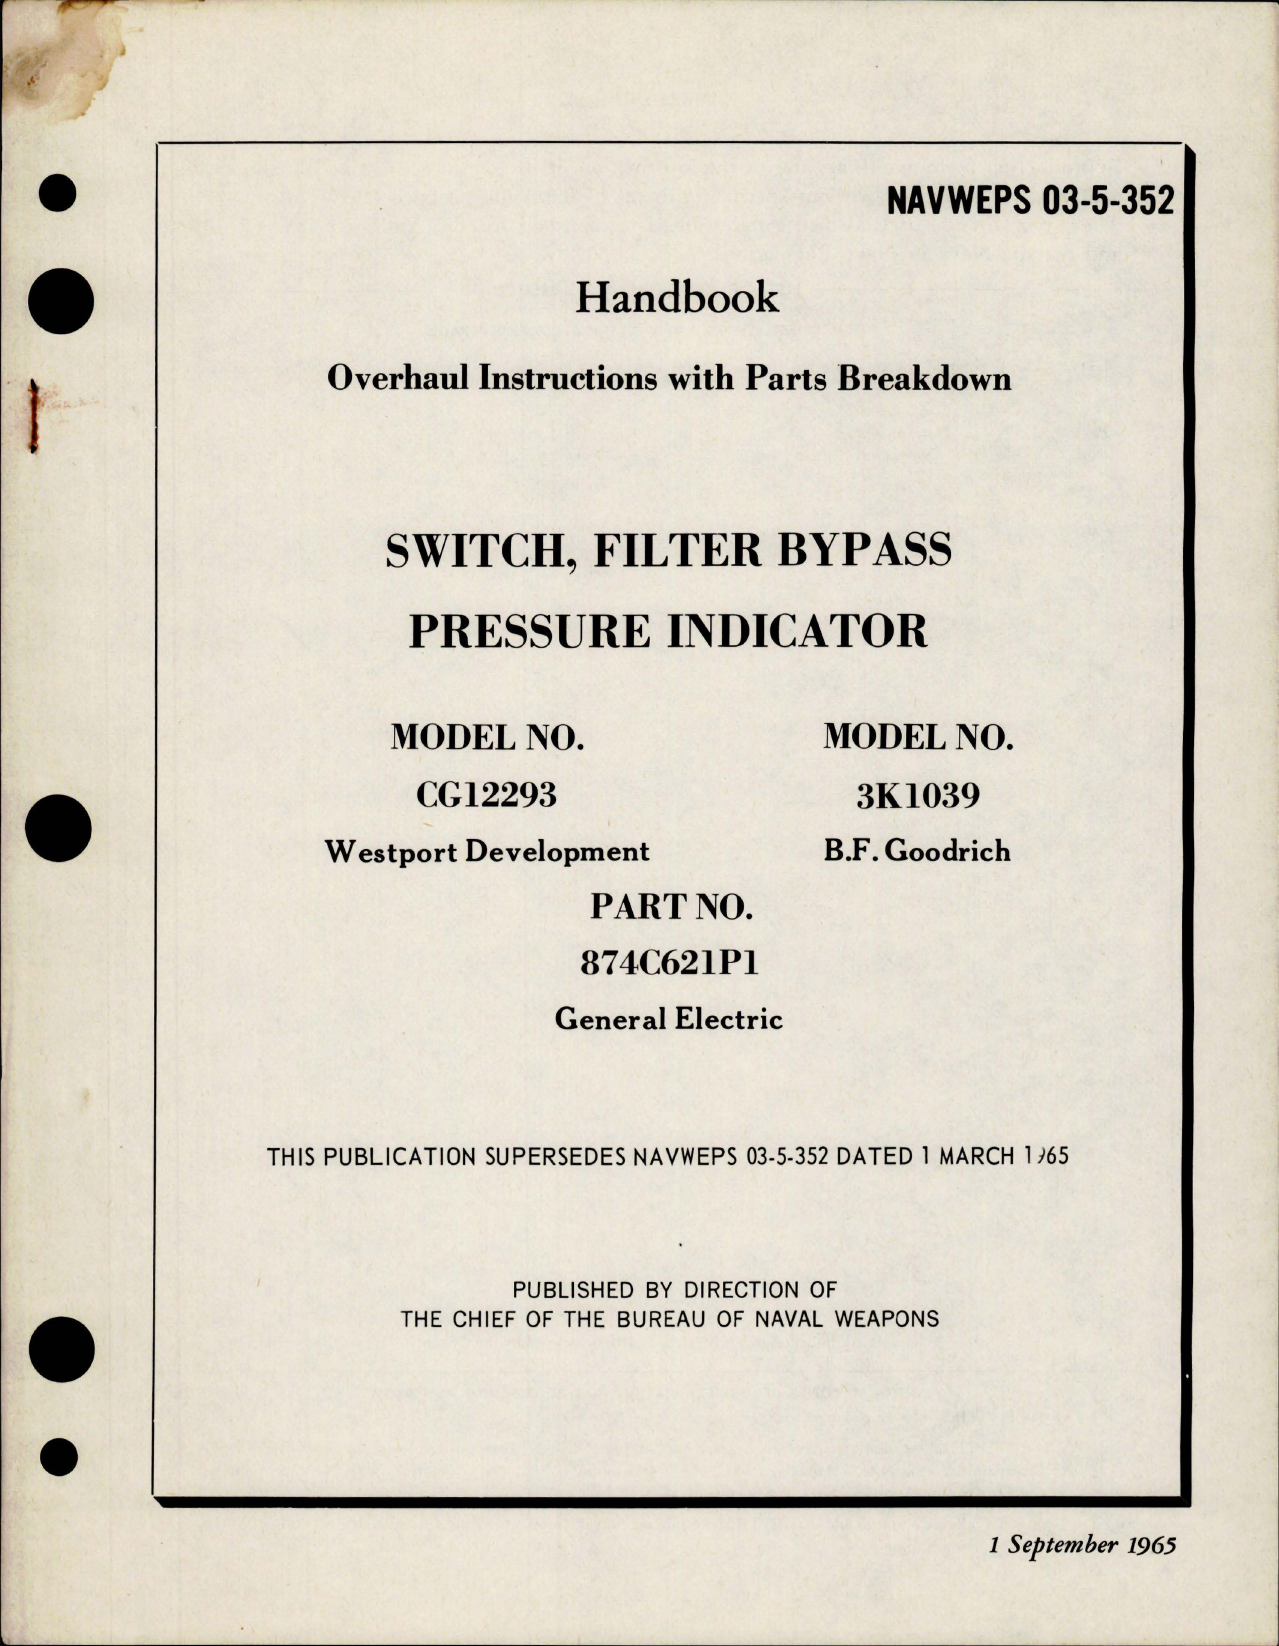 Sample page 1 from AirCorps Library document: Overhaul Instructions with Parts Breakdown for Filter Bypass Pressure Indicator Switch